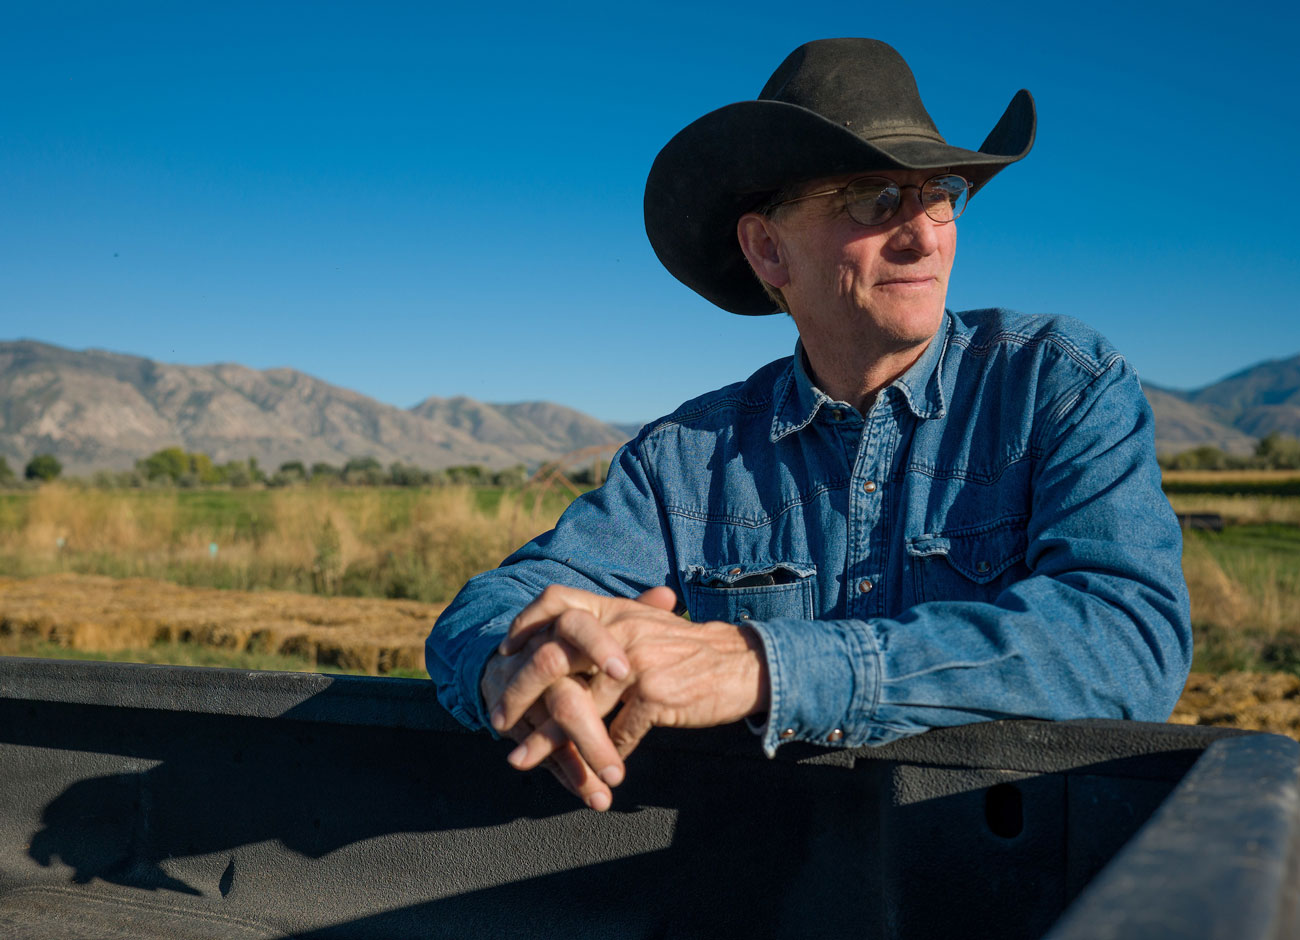 a cowboy in a black hat, denim shirt, and blue jeans leans against his truck surveying the landscape. Flanking him are golden fields and gray mountains.